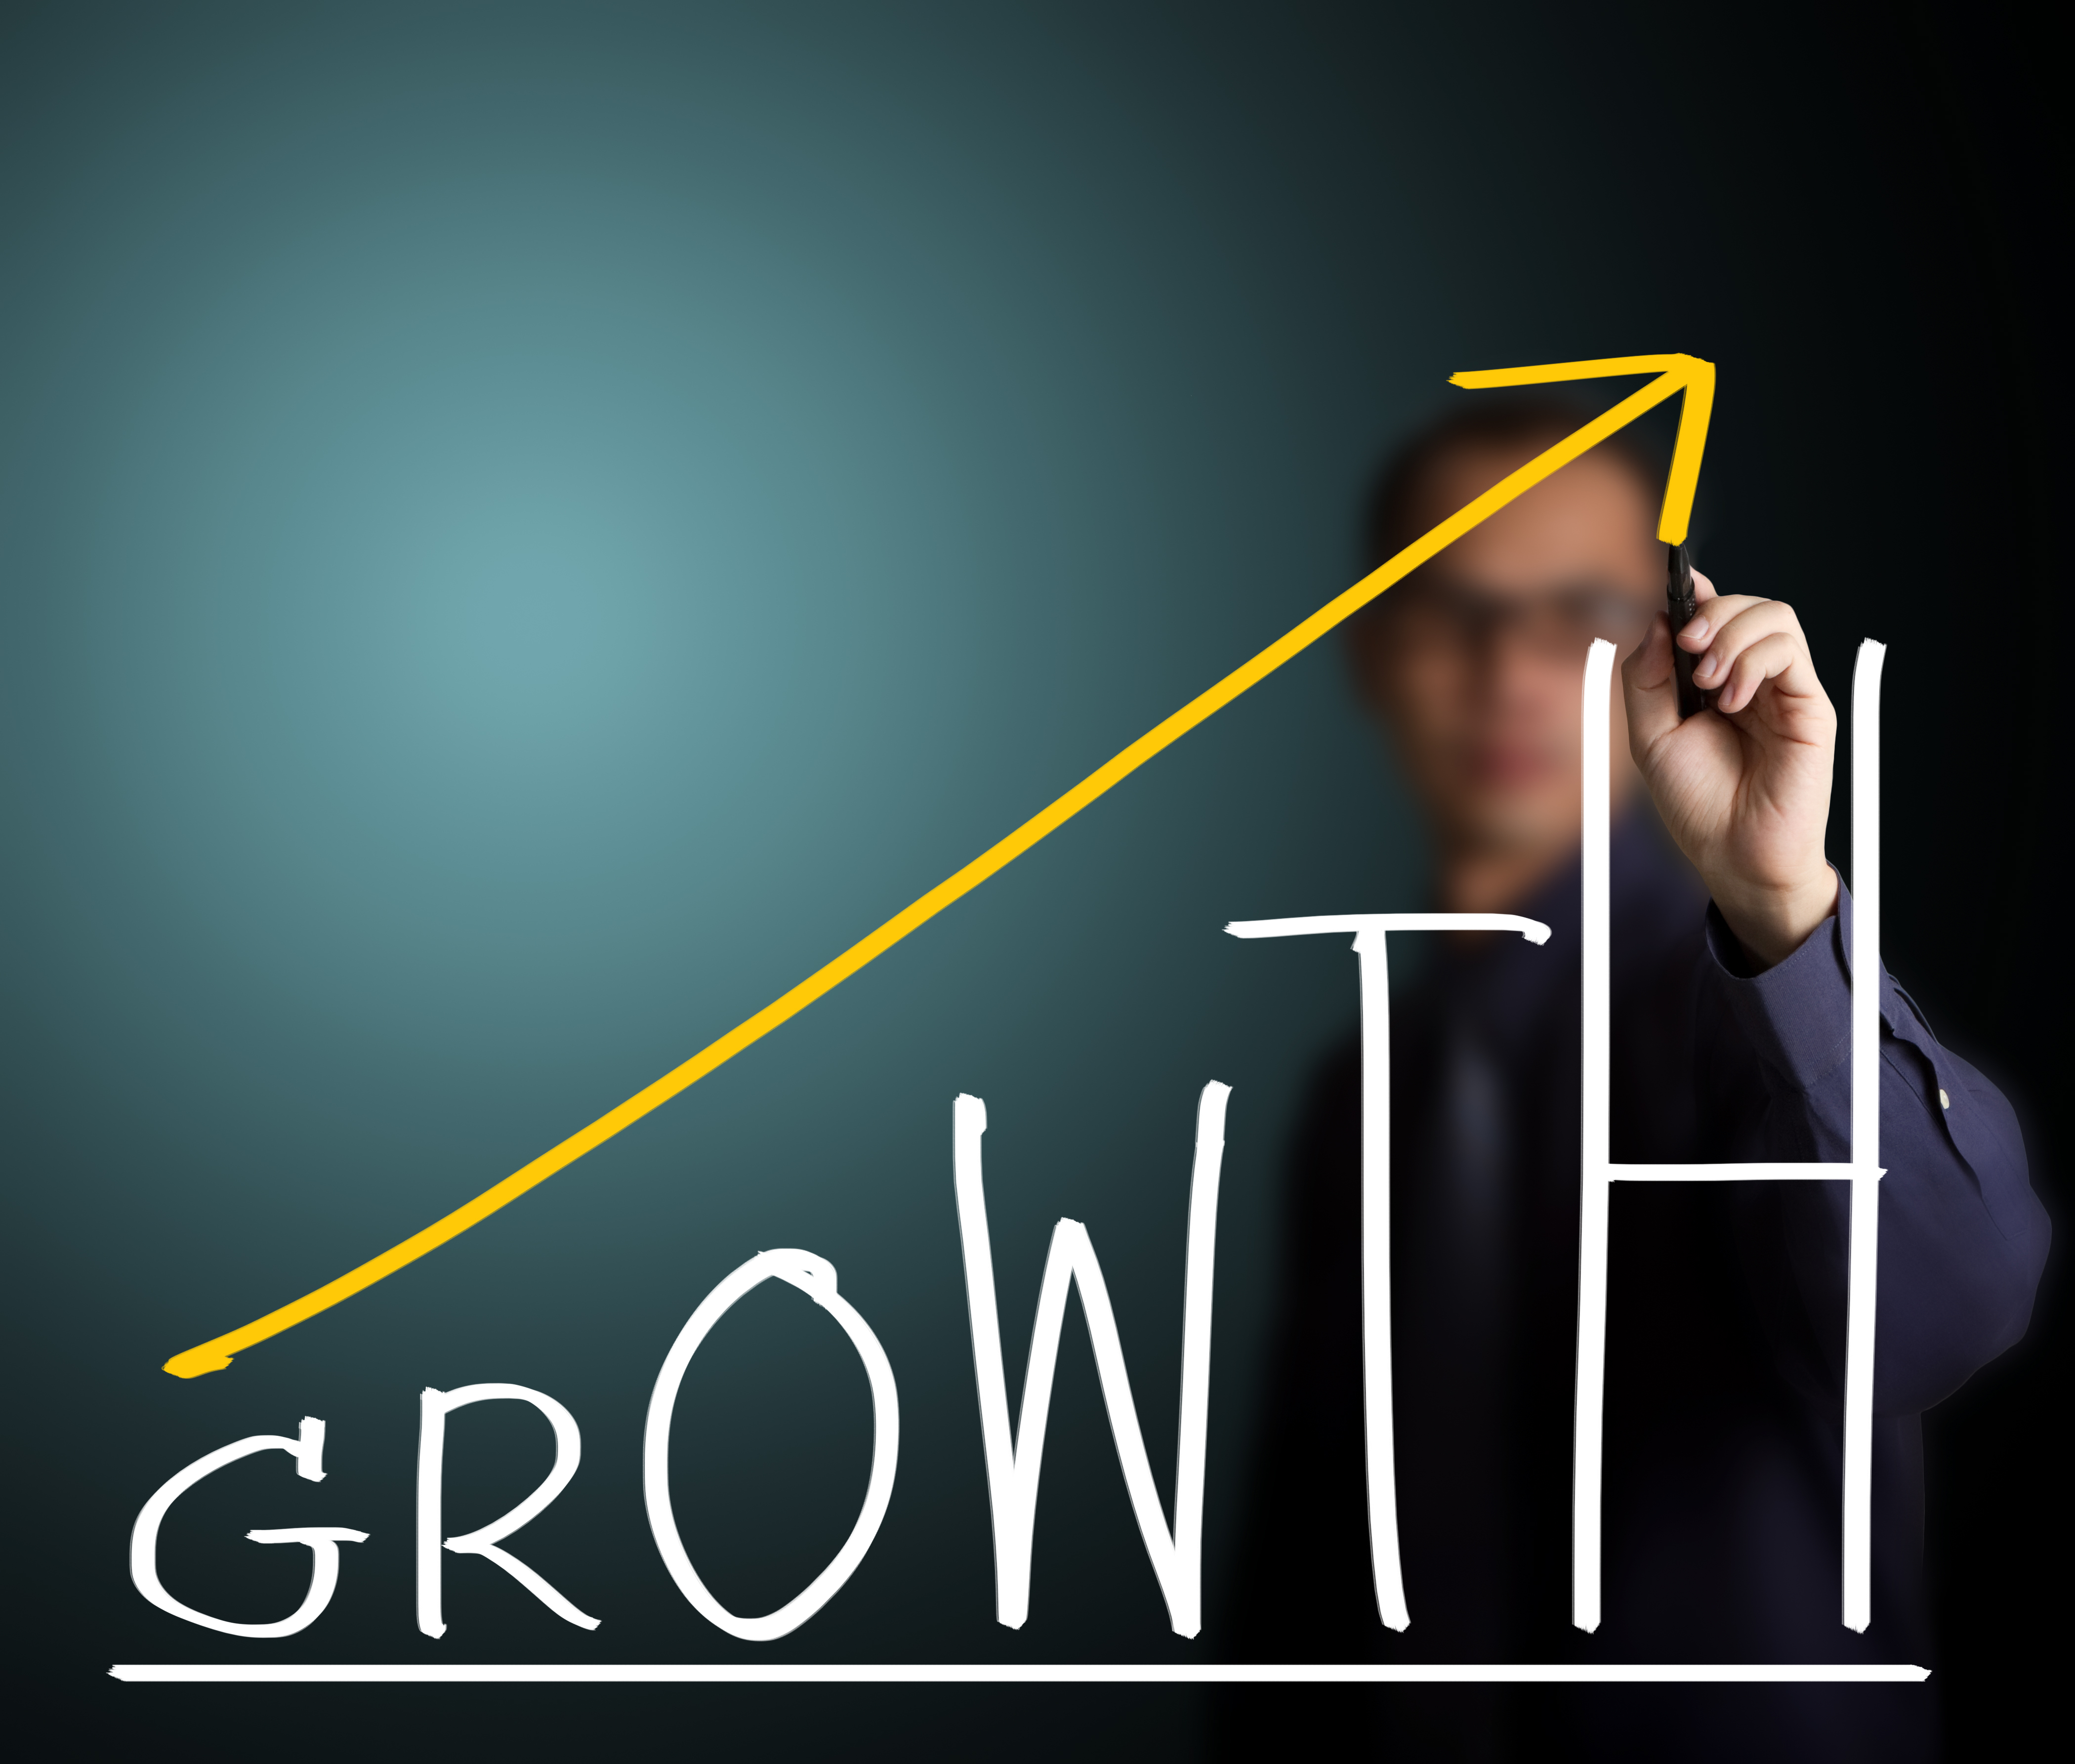 Growth Business Image